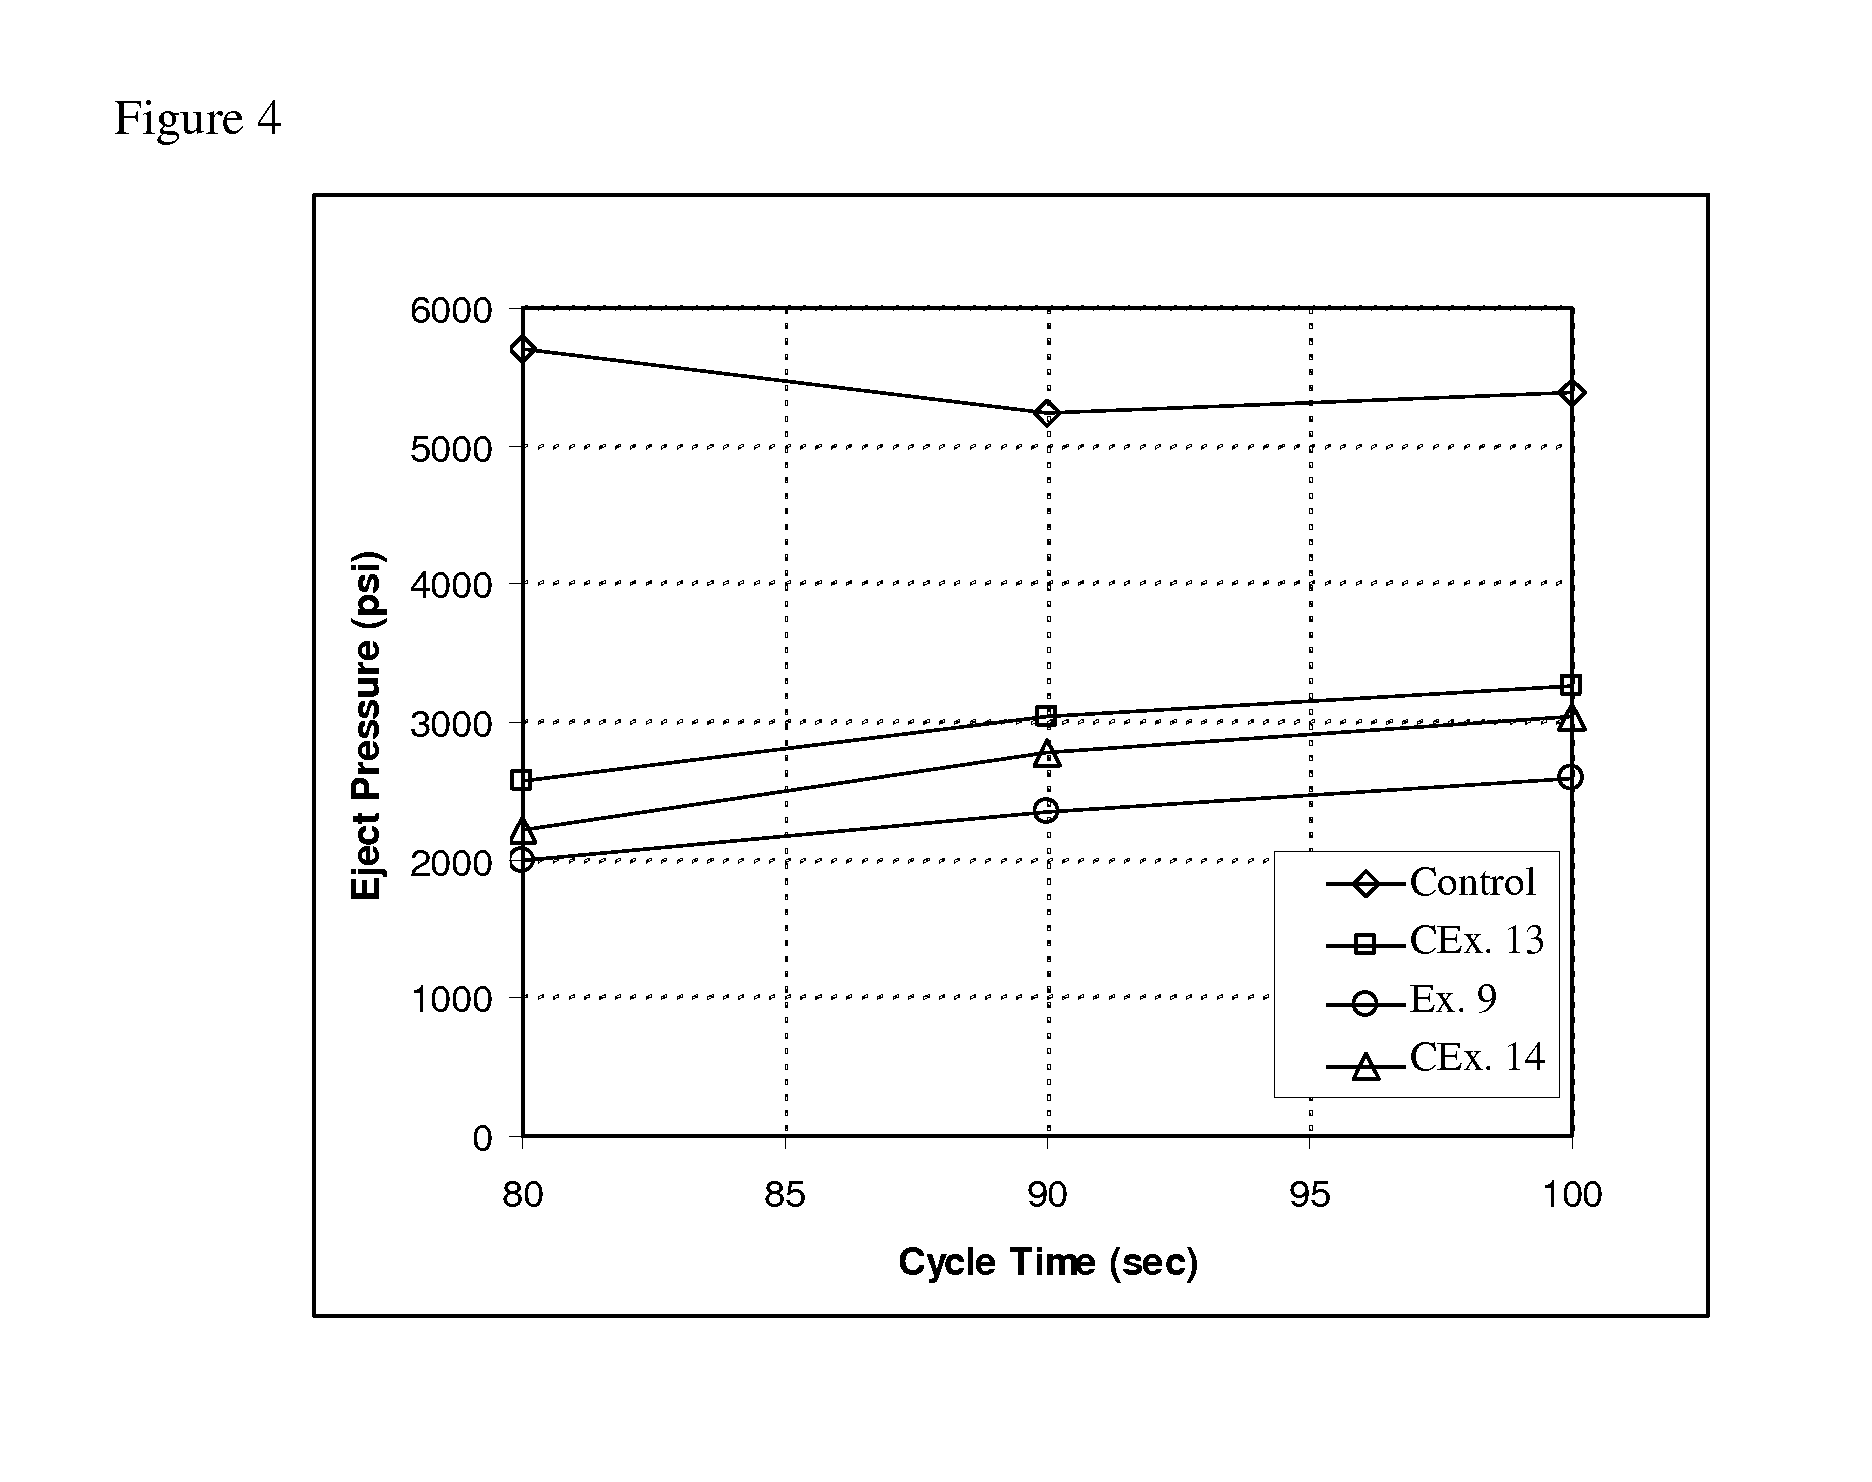 Thermoplastic composition having improved x-ray contrast, method of making, and articles prepared therefrom